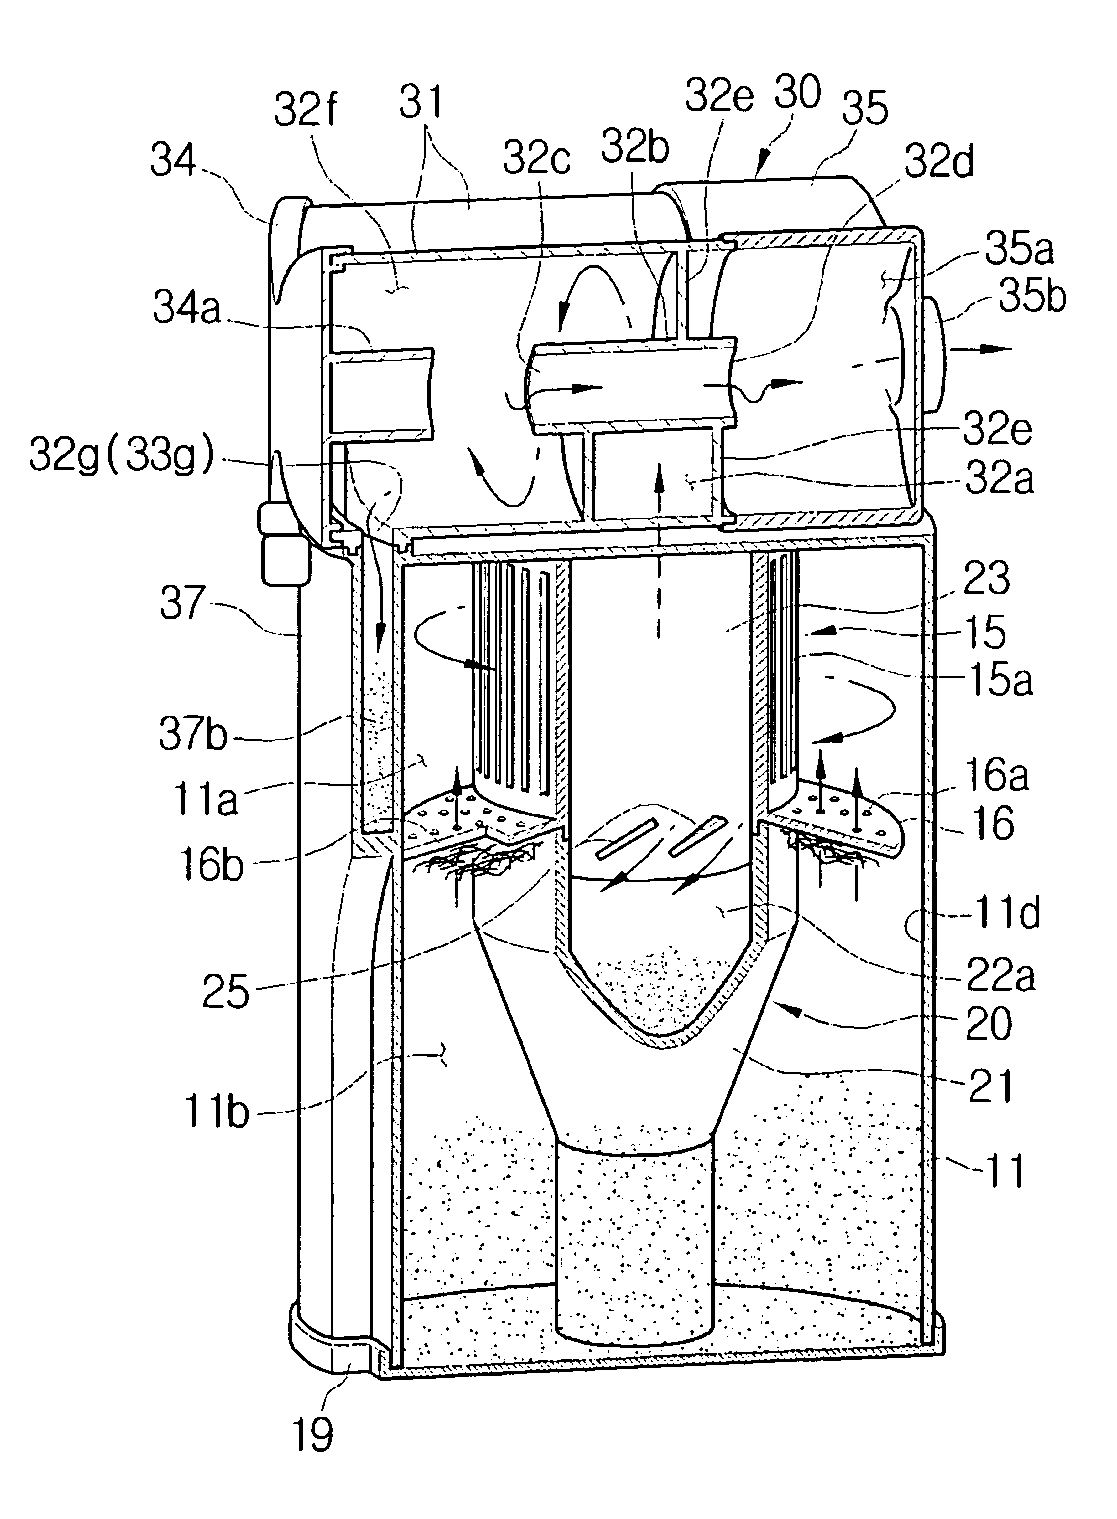 Cyclone dust-collecting apparatus